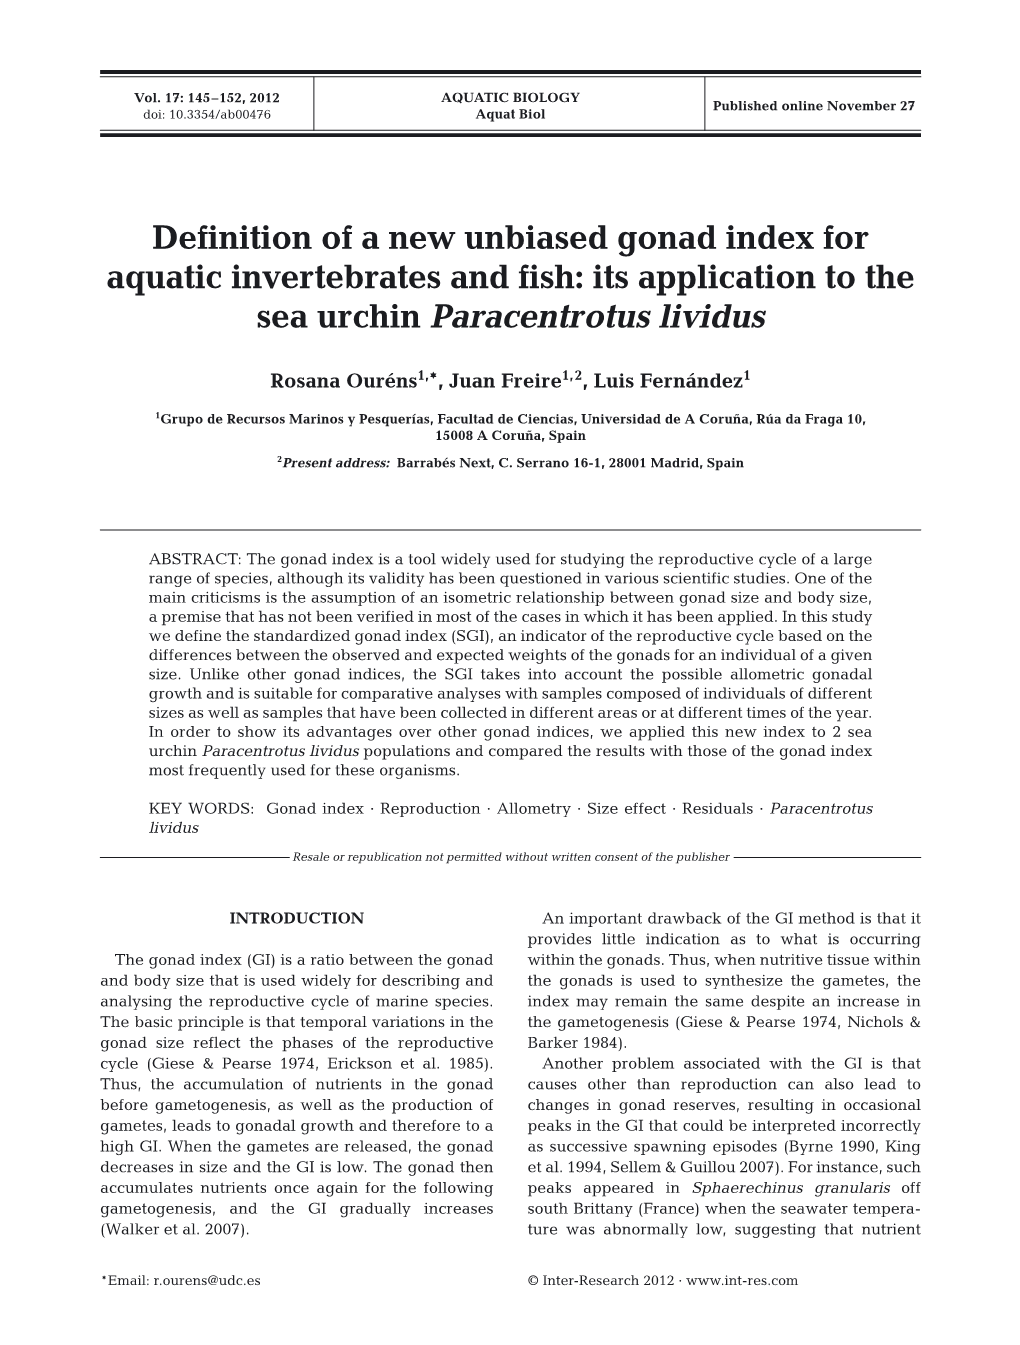 Definition of a New Unbiased Gonad Index for Aquatic Invertebrates and Fish: Its Application to the Sea Urchin Paracentrotus Lividus